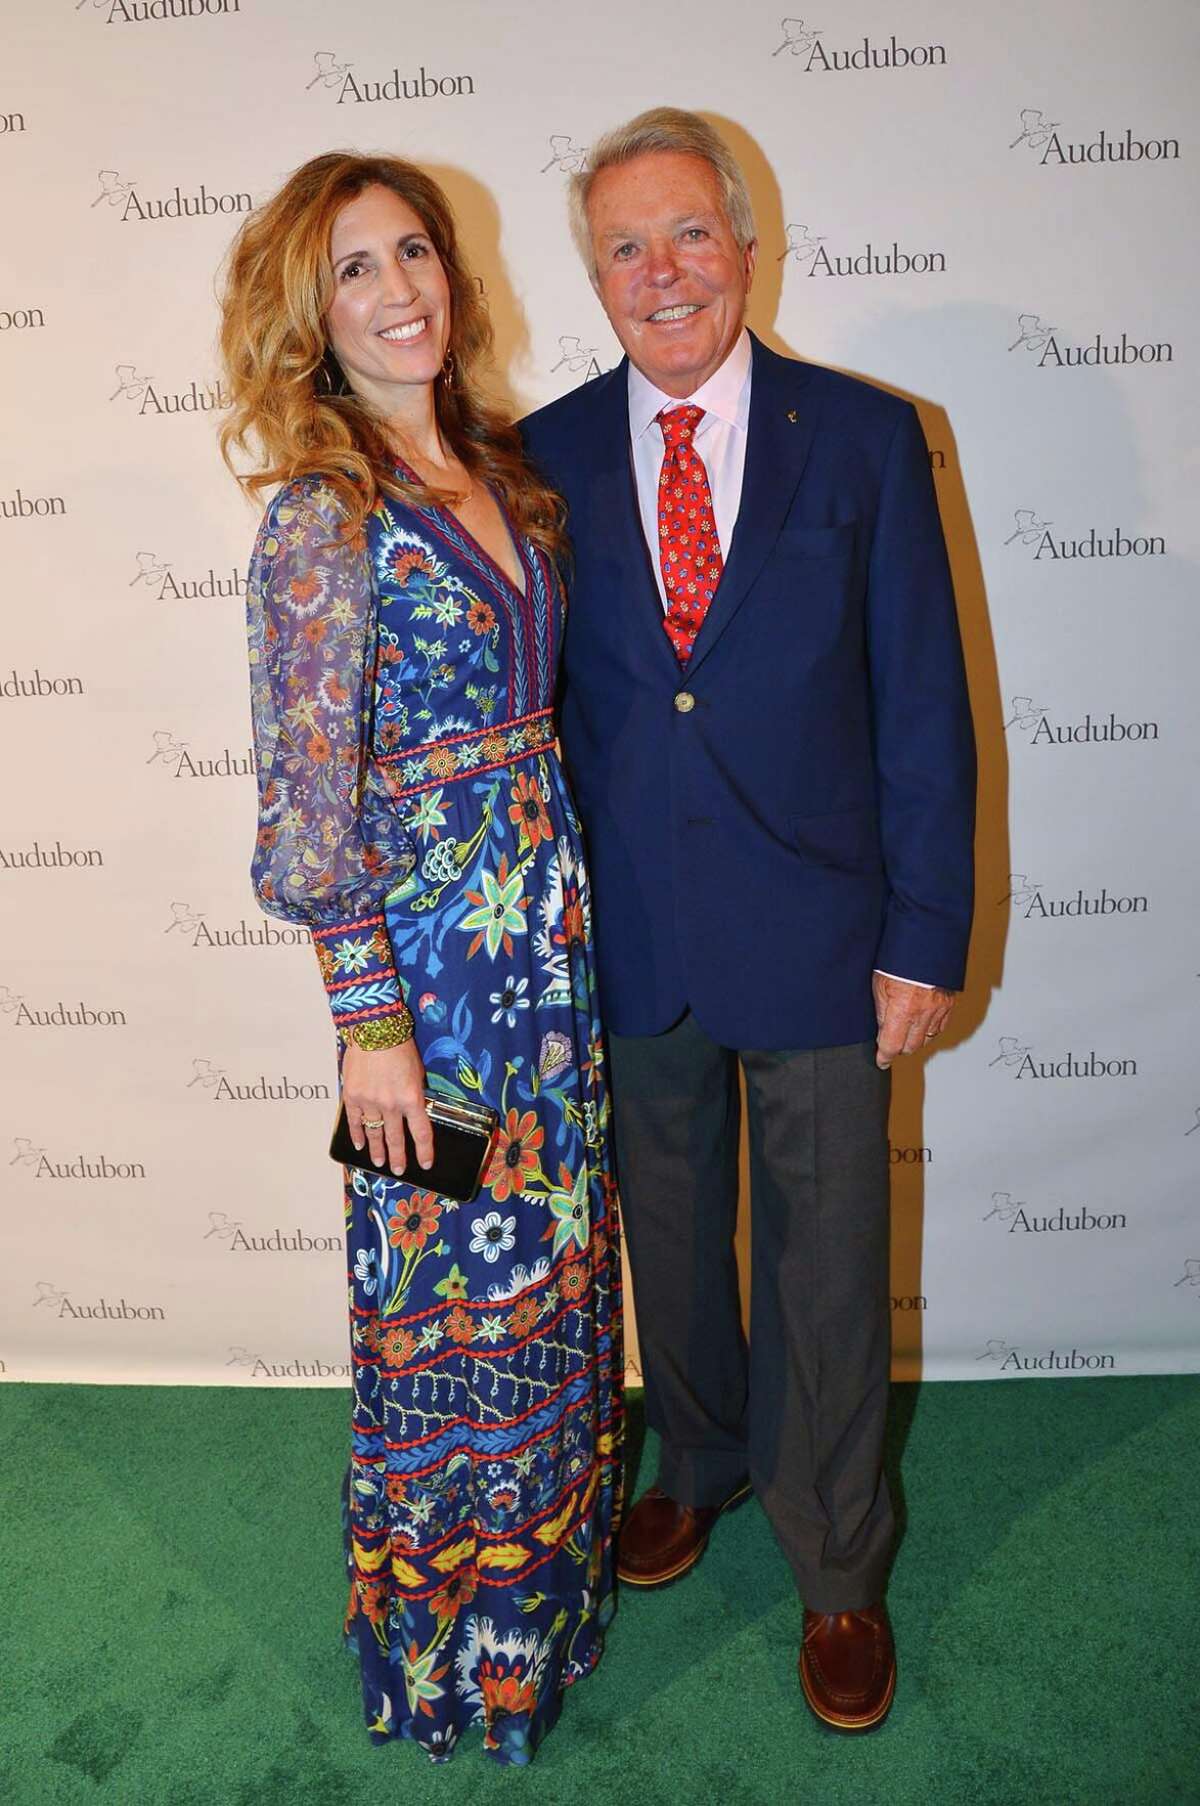 Dan and Adrienne Lufkin at the National Audubon Society Gala 2019 at The Plaza Hotel in New York City. 